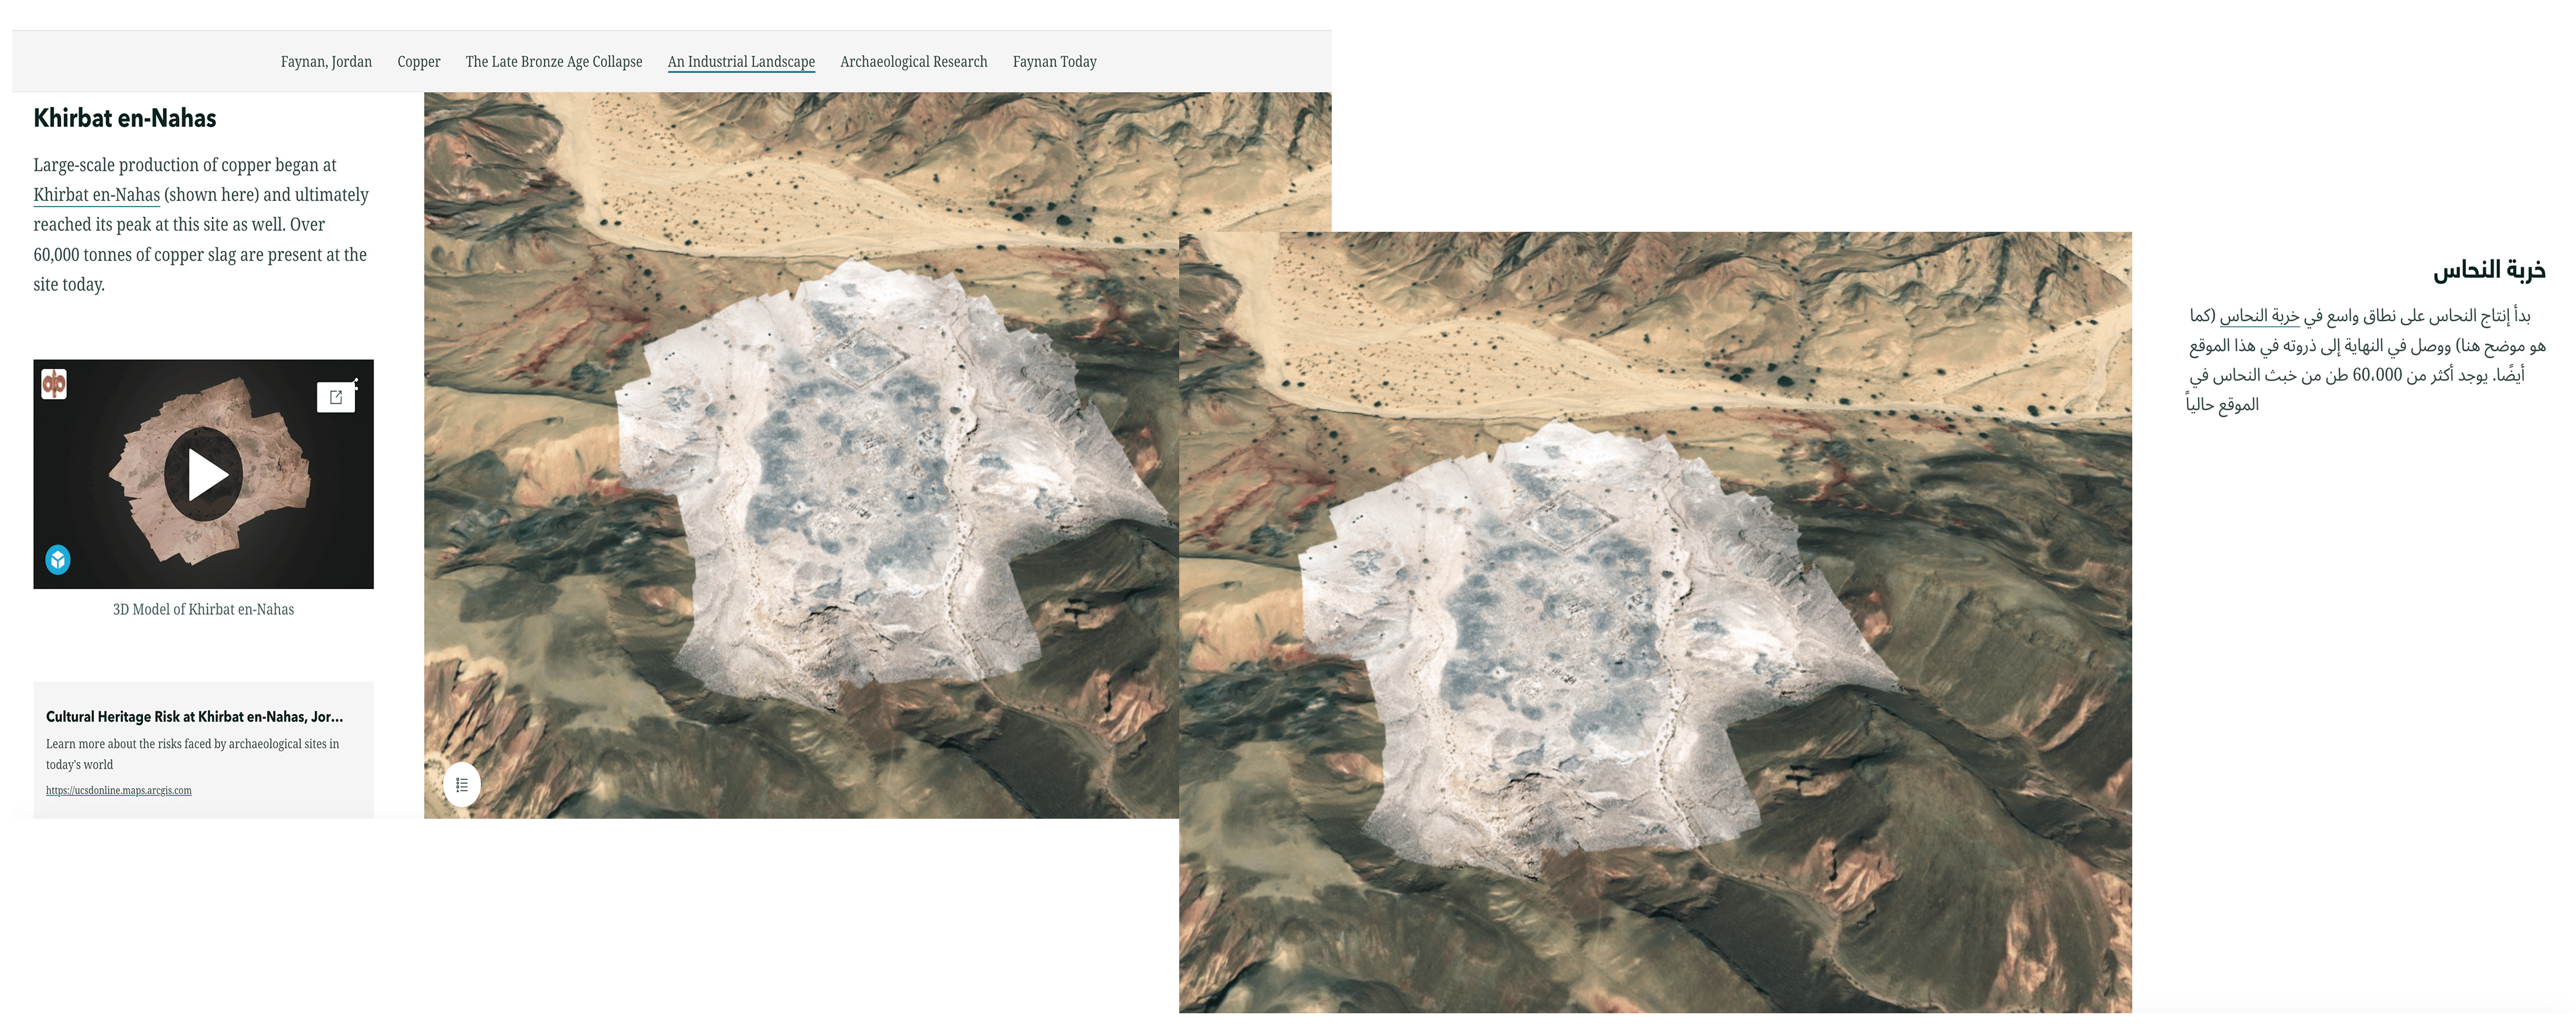 Side by side comparison of two sidecar immersive block screenshots of Ariel terrain images, one with English text the other with Arabic text.